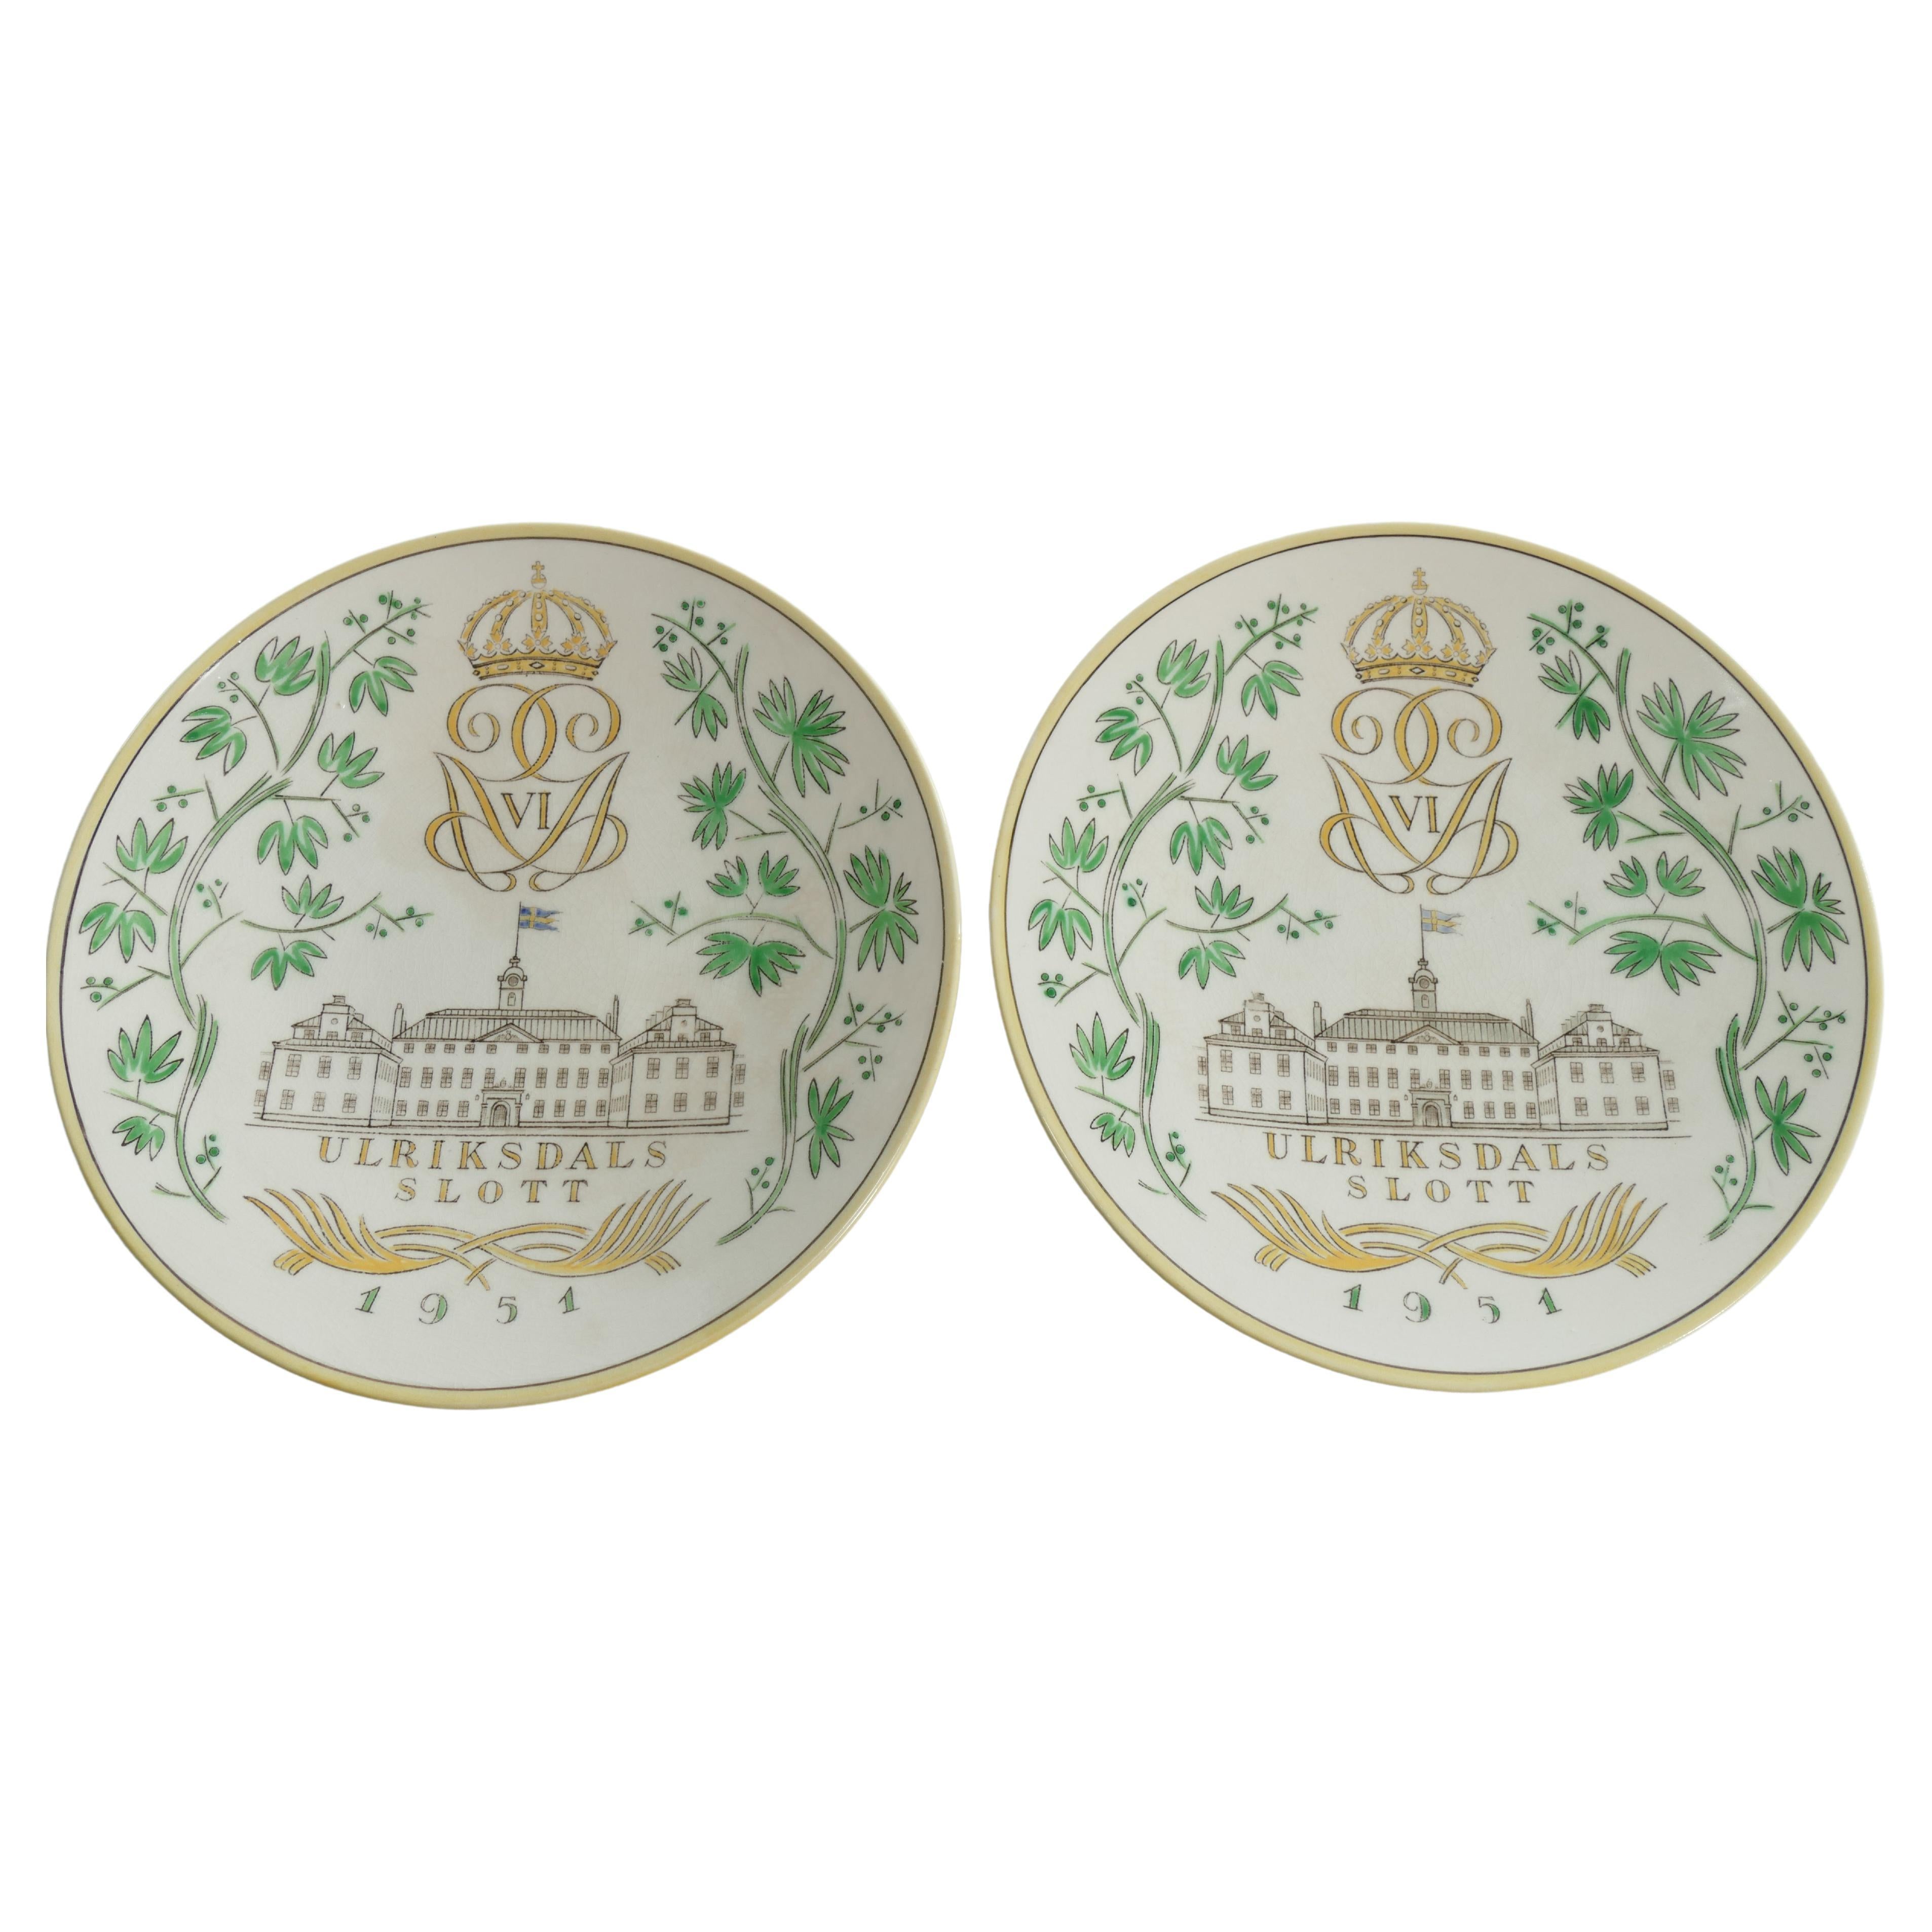 Swedish Grace Plates with Ulriksdal Palace in Yellow and Green by Gefle 1951 For Sale